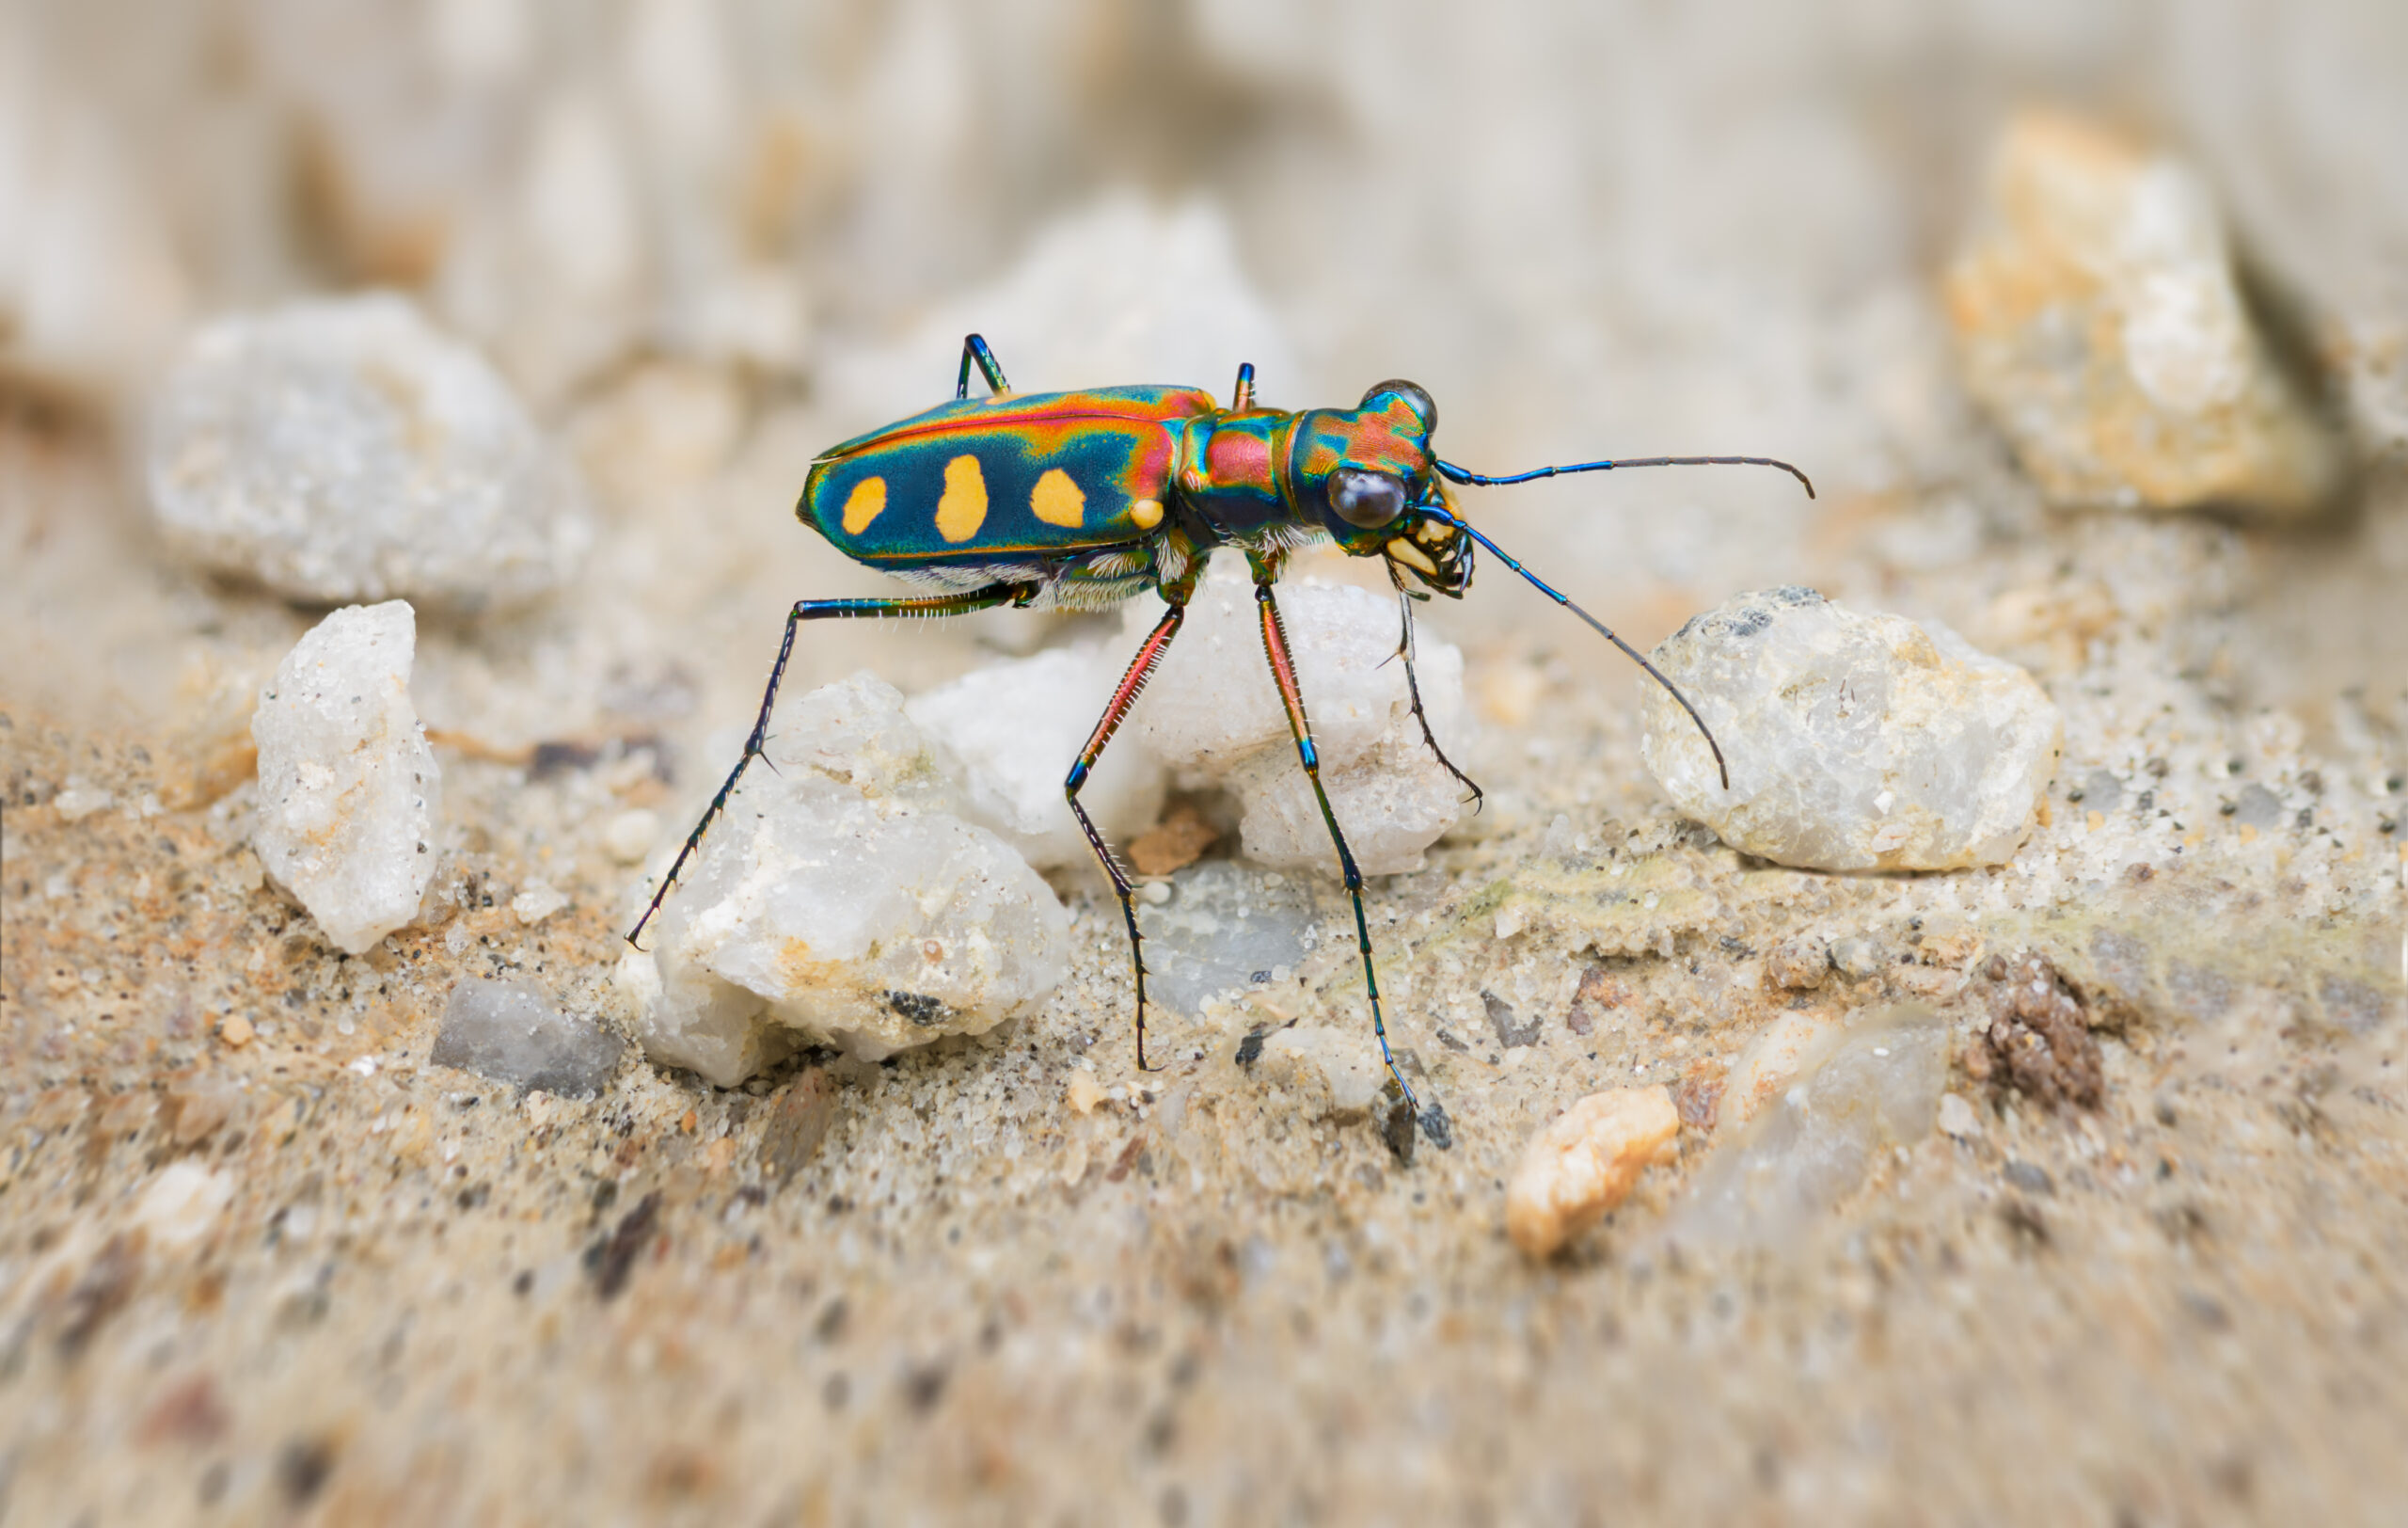 A Tiger Beetle’s Blinding Speed: How They Outmaneuver Obstacles